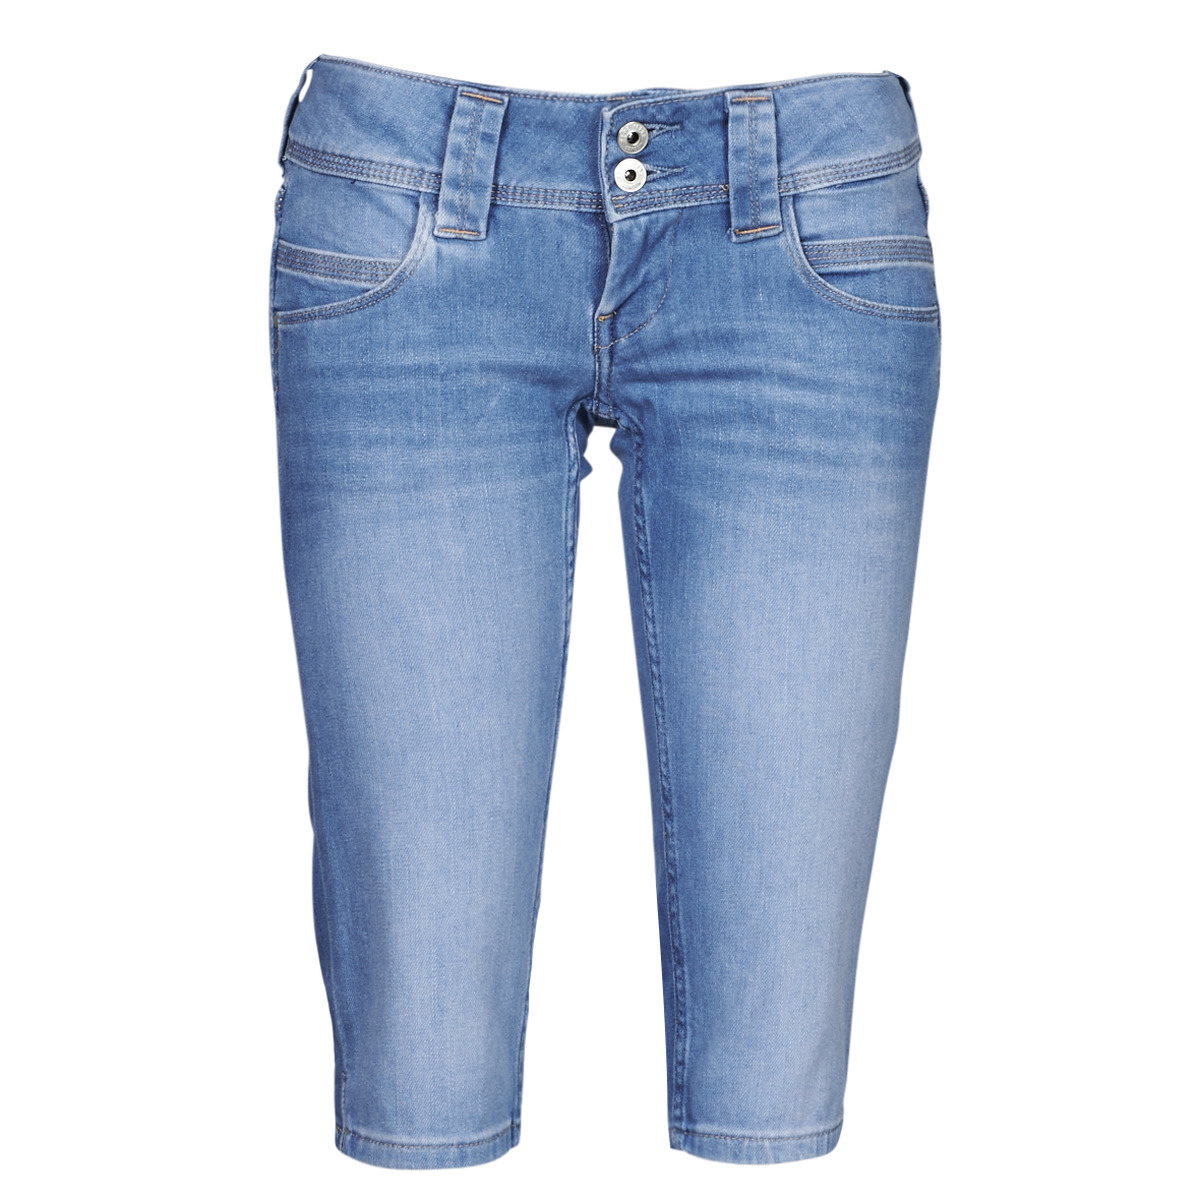 Clothing Women cropped trousers Pepe jeans VENUS CROP Blue